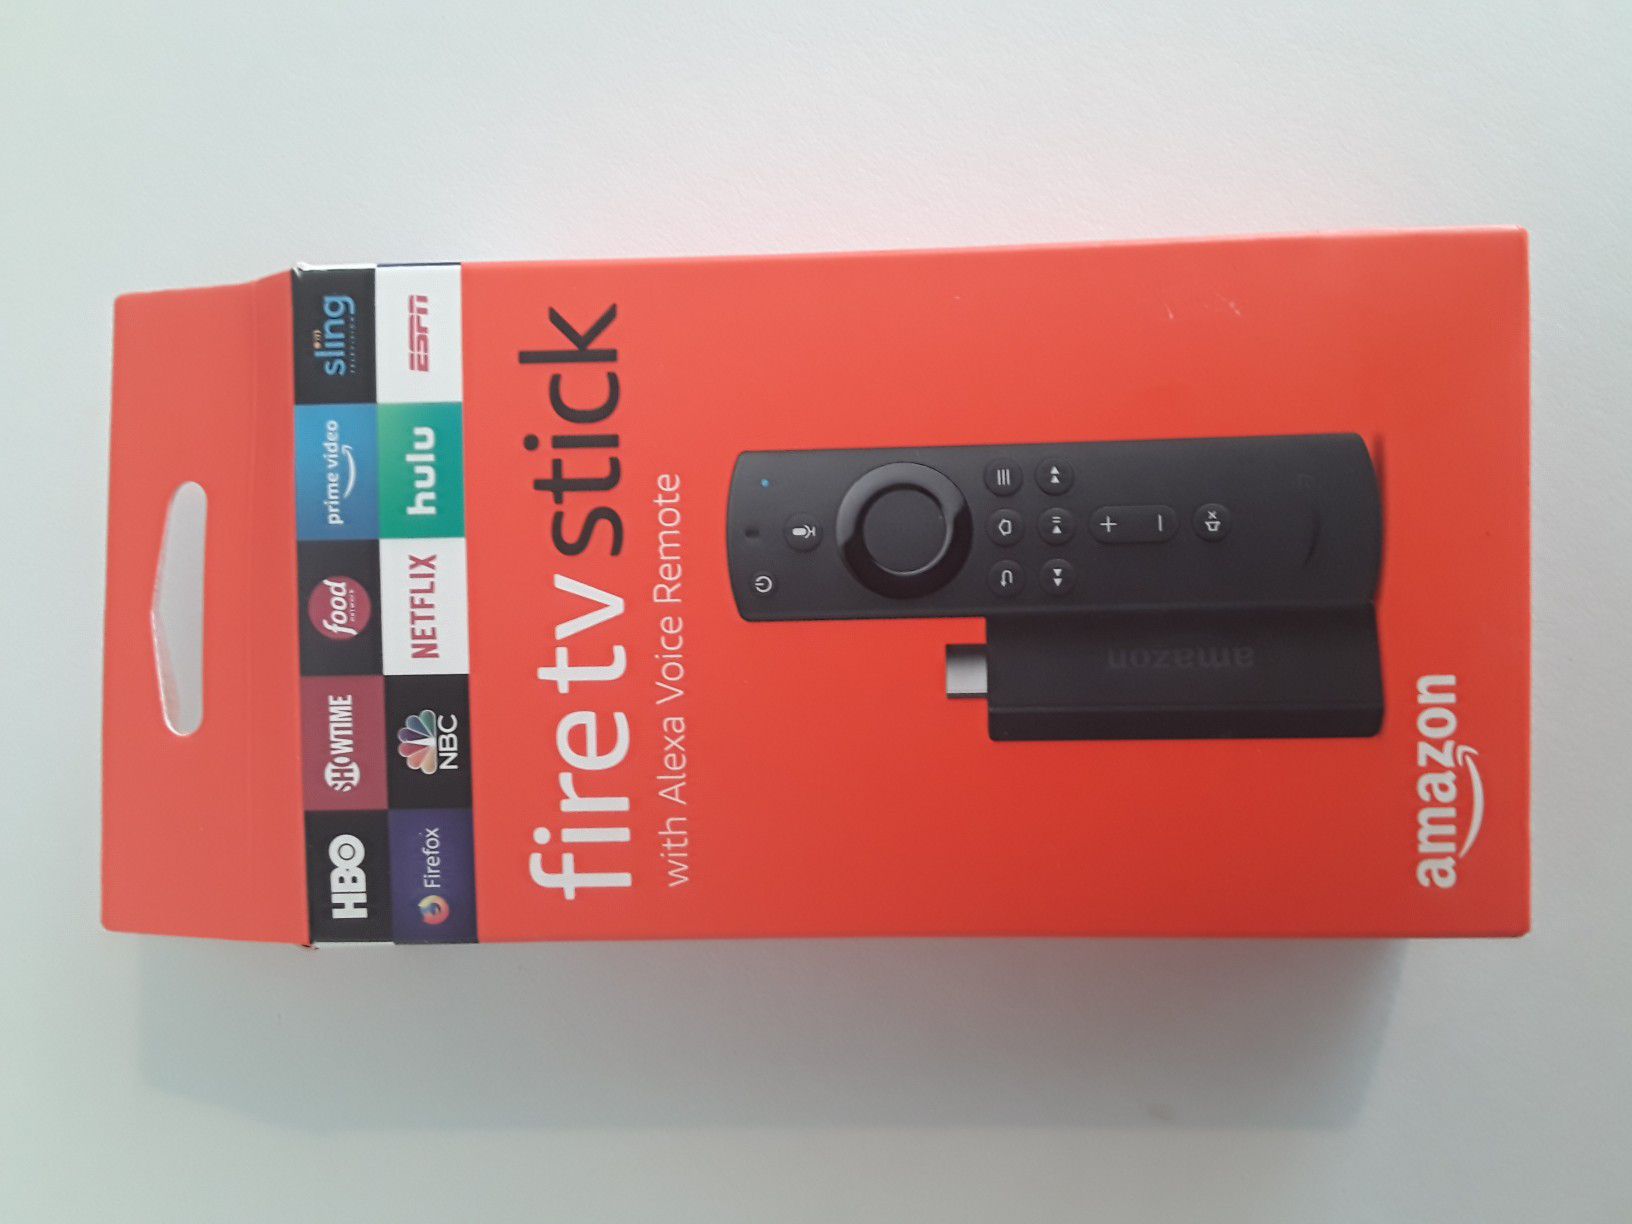 Fire TV Stick: If ad is still here, means it's still available. Thanks.